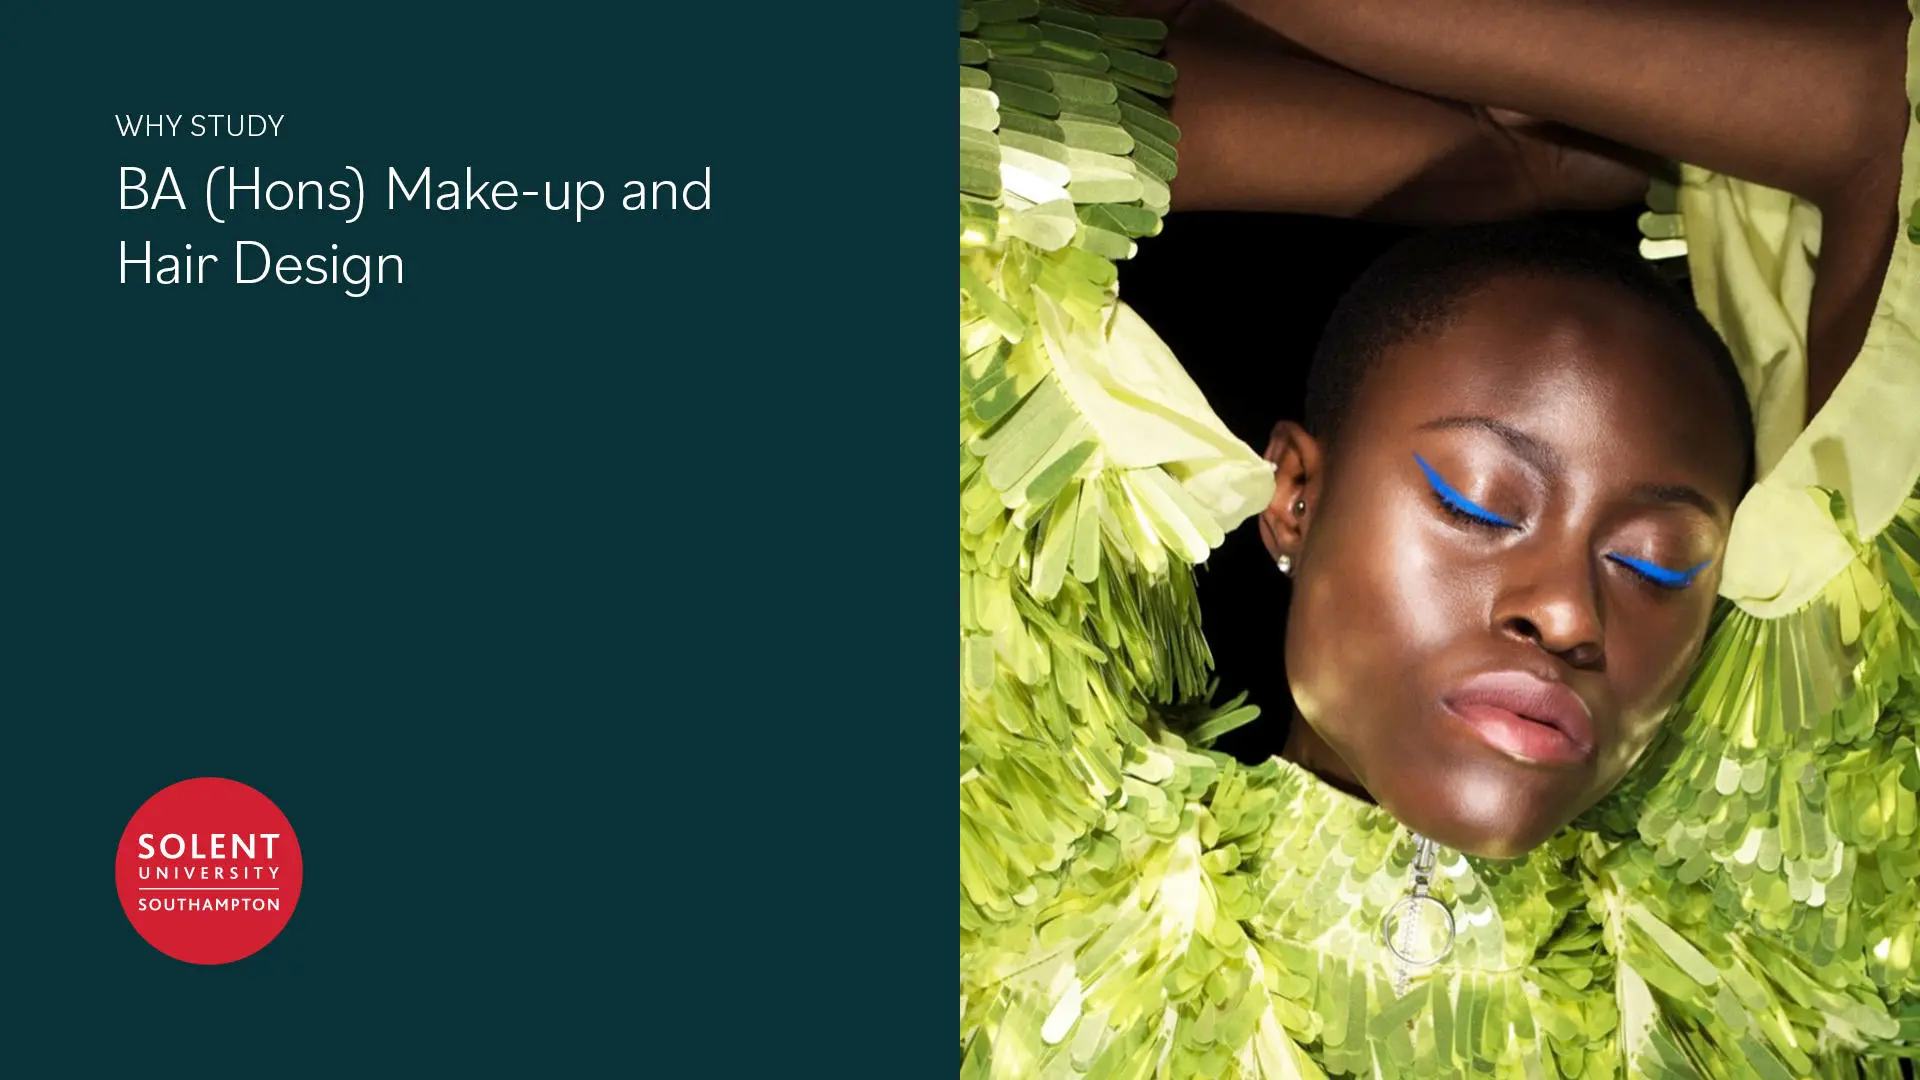 Image reads Why study BA (Hons) Make-up and Hair Design